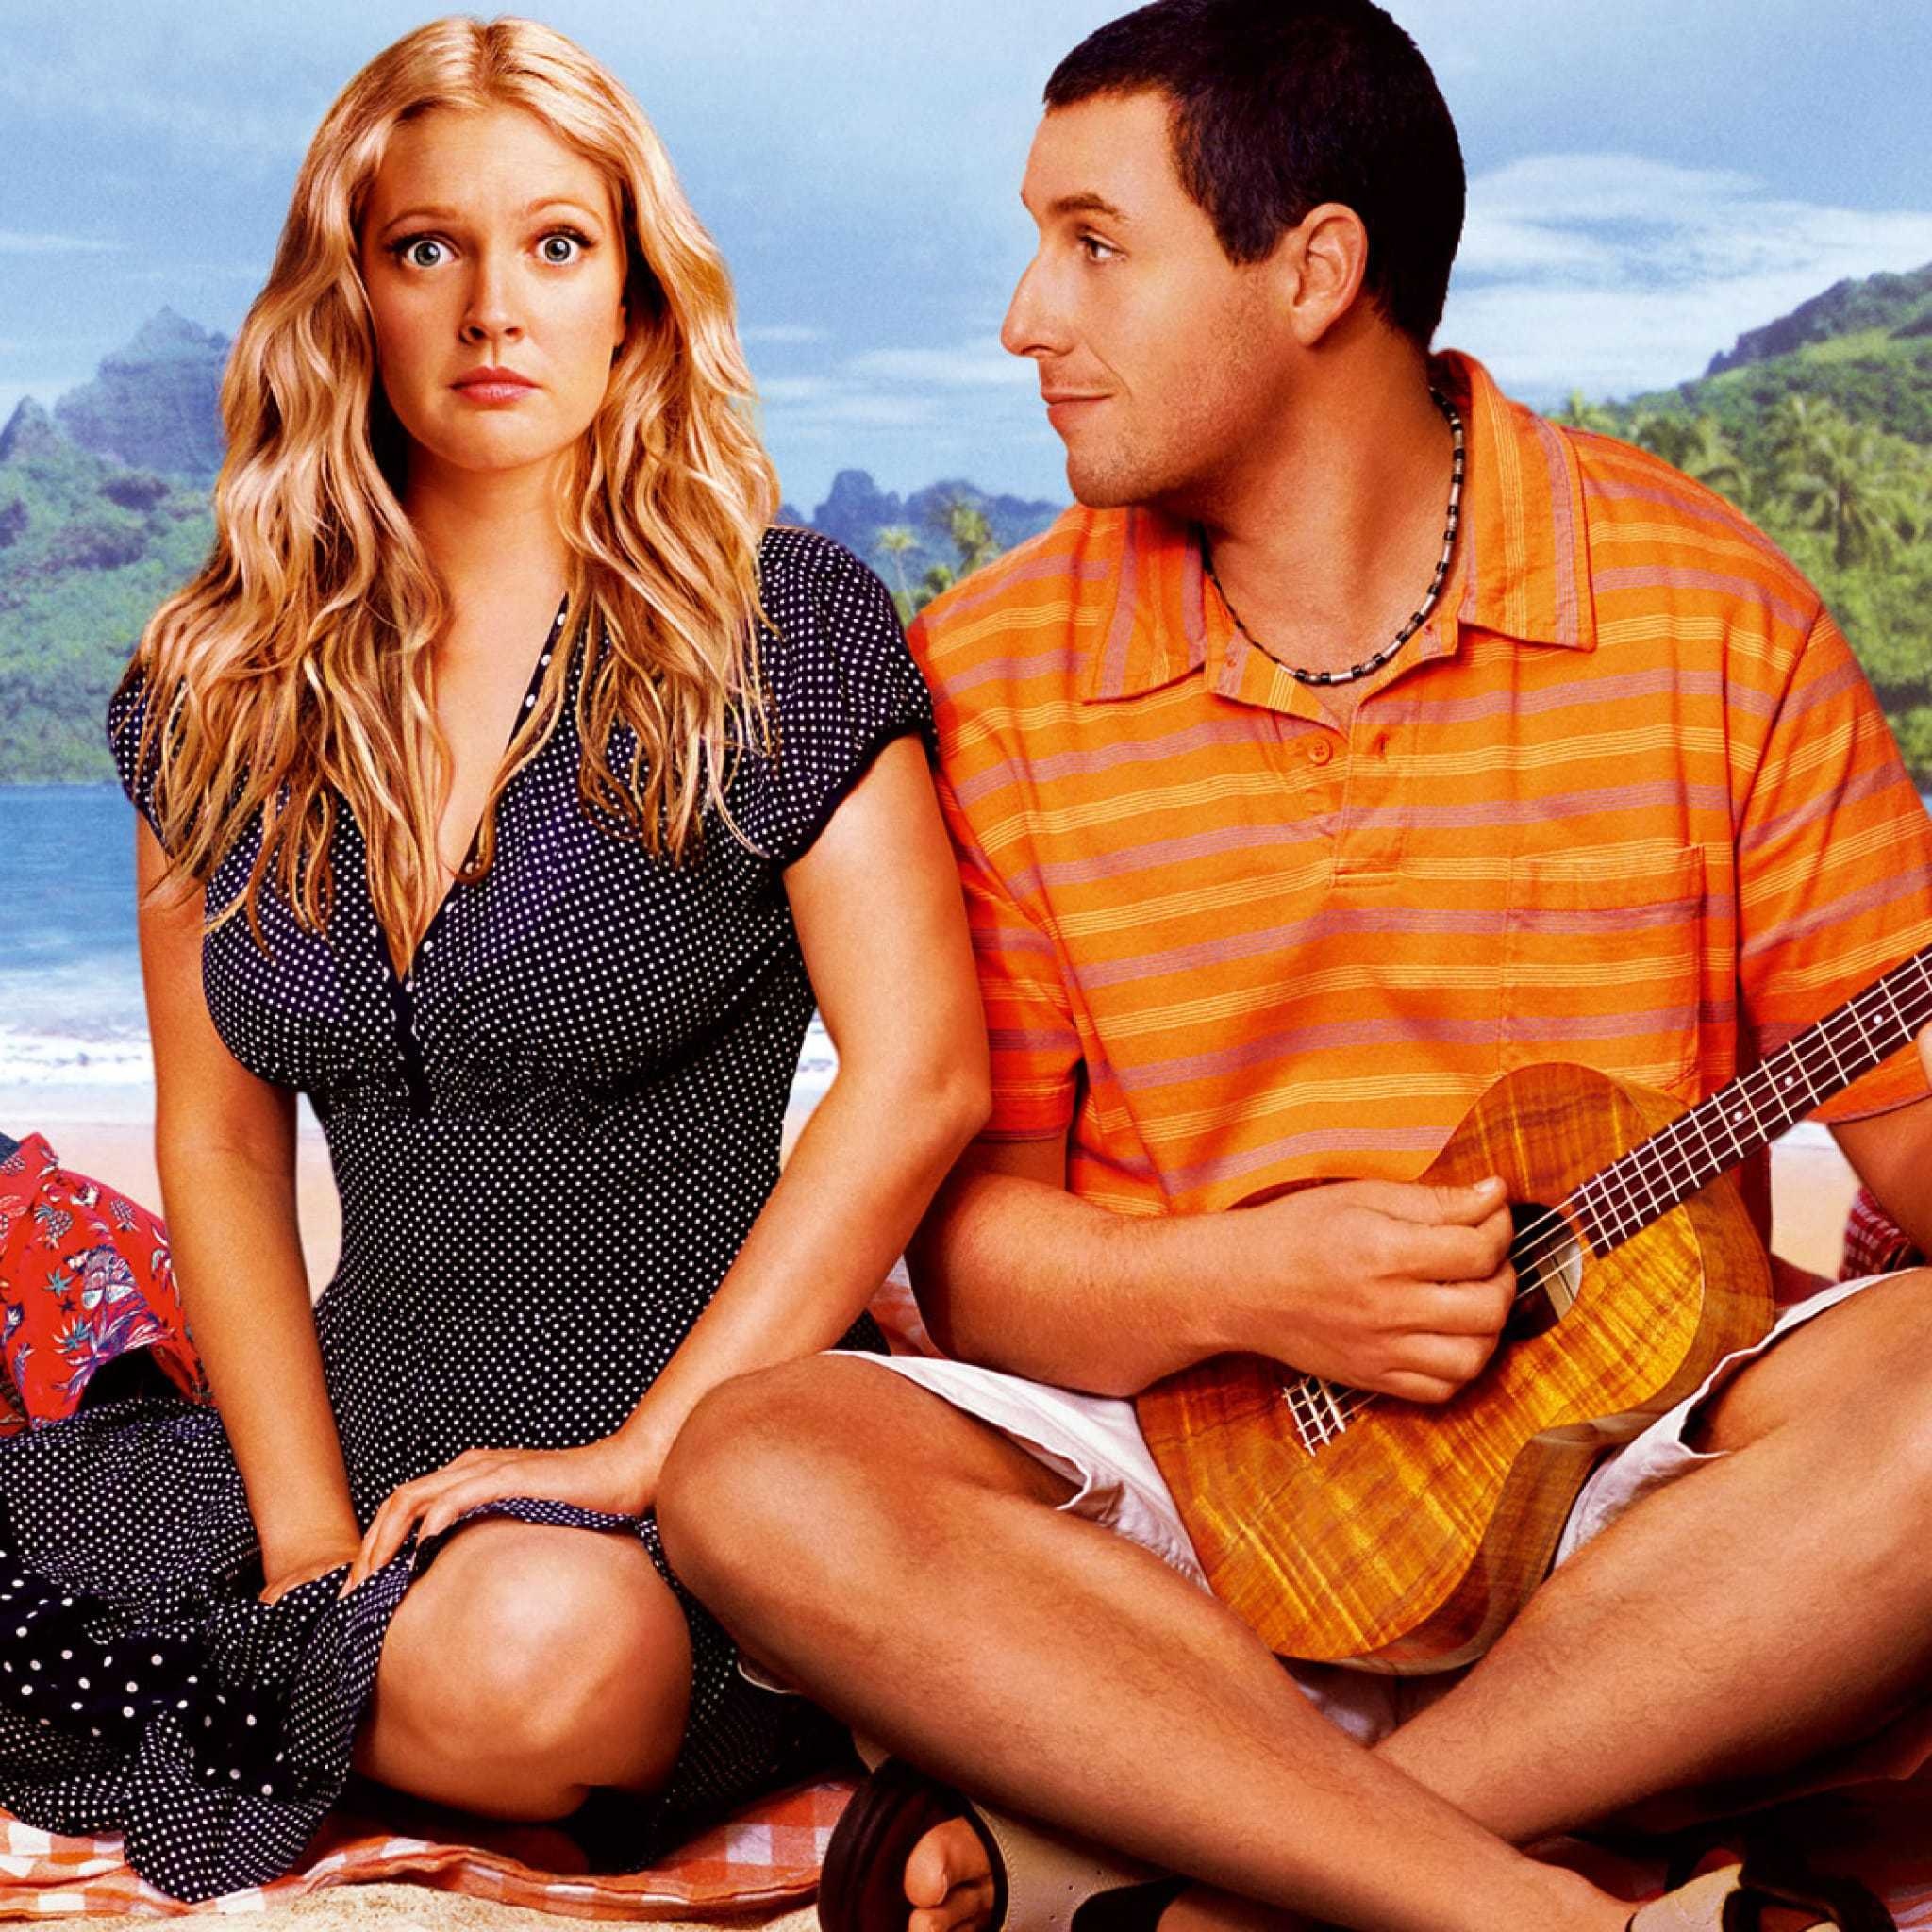 Adam Sandler movies, Awesome backgrounds, Free HD wallpapers, 2050x2050 HD Phone